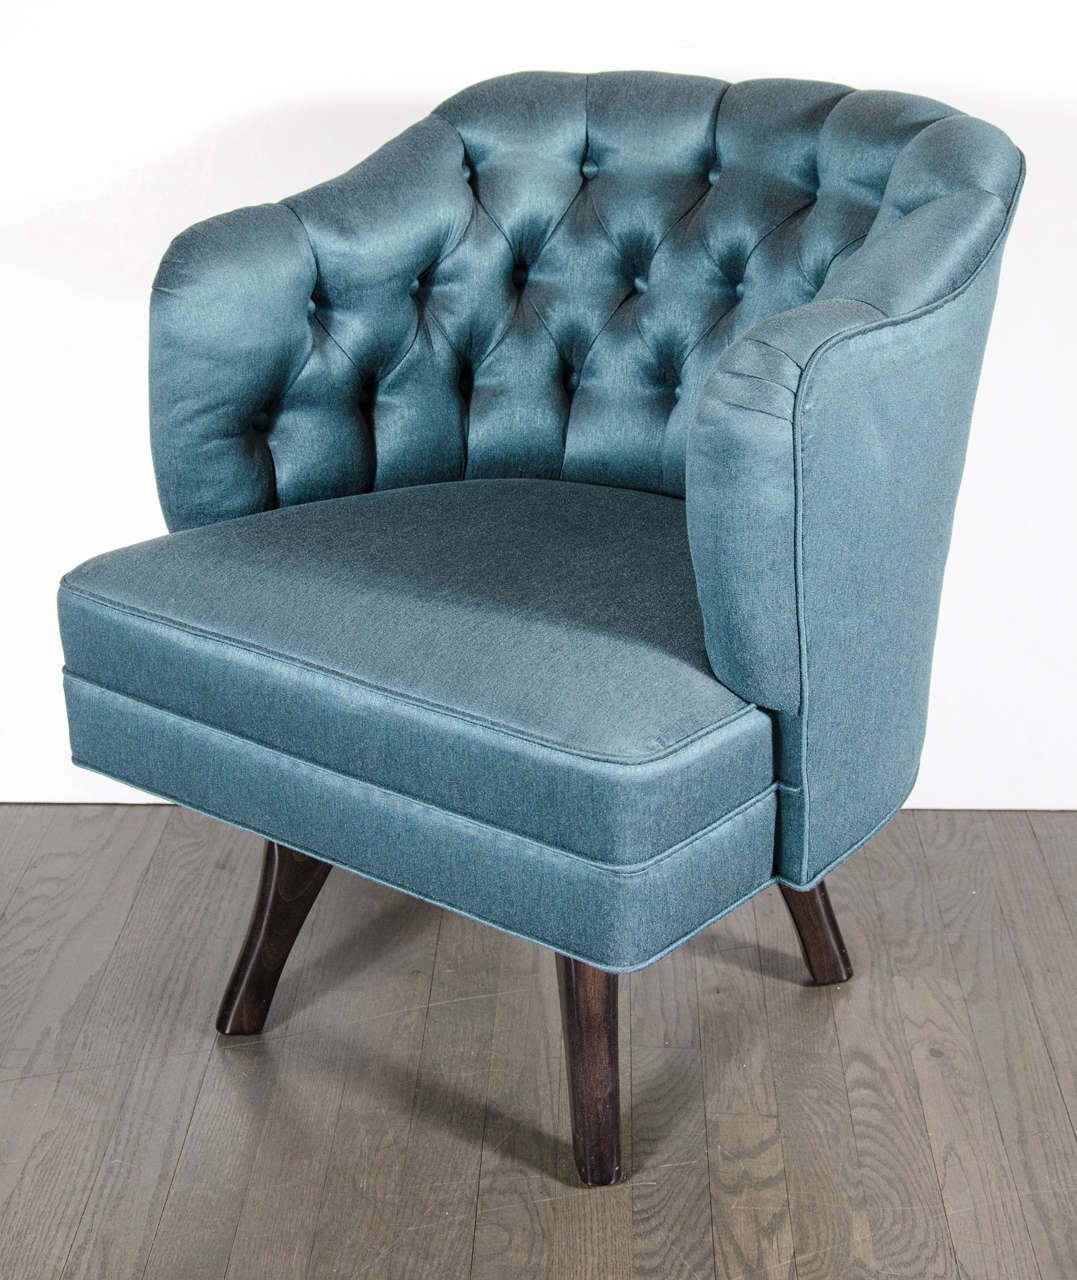 This gorgeous pair of Mid-Century Modernist swivel chairs consist of a fully upholstered seat with deep button detailing on the back, splayed taper legs in ebonized walnut and new teal sharkskin upholstery. Restored to mint condition.